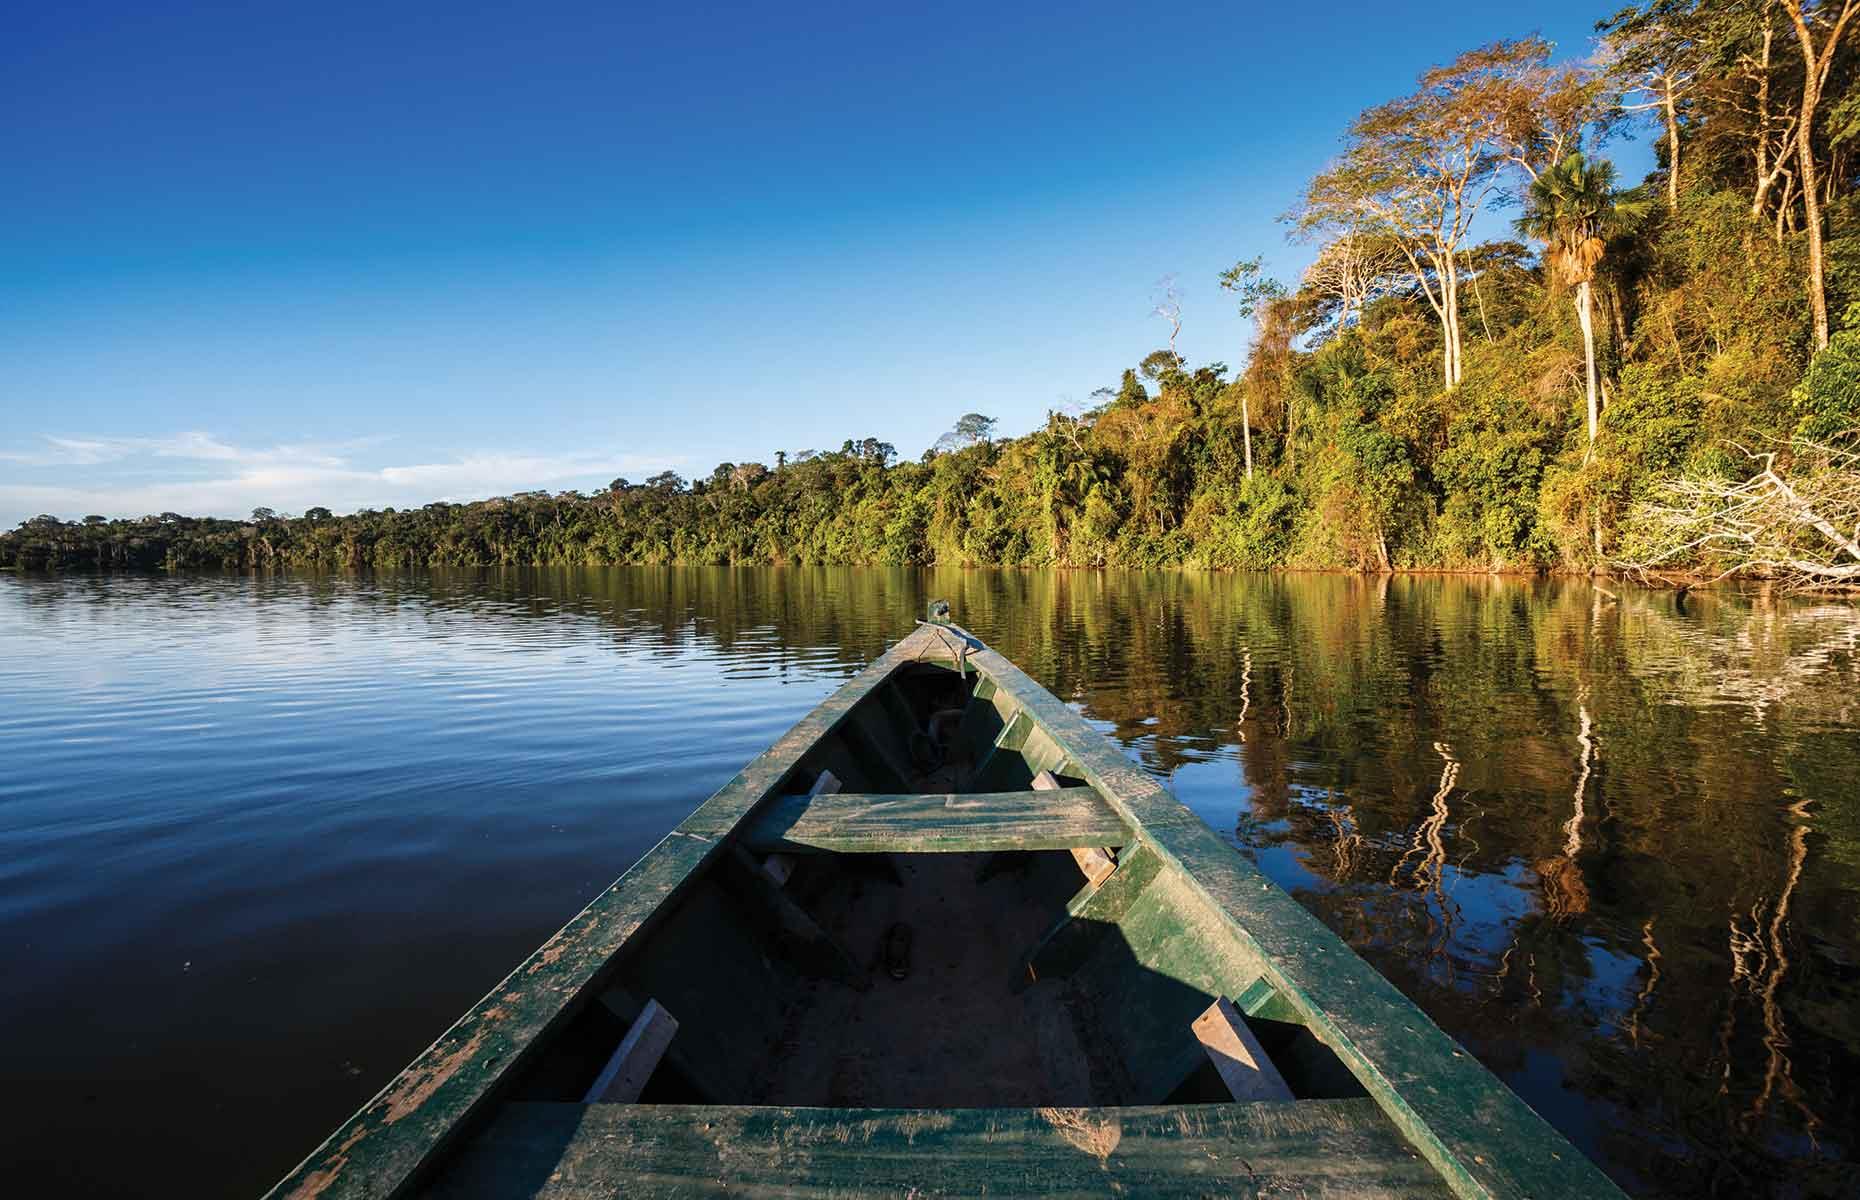 <p>Encompassing 2.1 million square miles (5.5 million sq km), the Amazon rainforest contains an estimated 390 billion trees from 16,000 species. In surface area, it accounts for half of the world’s remaining rainforest. It ranges over nine countries: Brazil, Peru, Colombia, Bolivia, Ecuador, French Guiana, Guyana, Suriname and Venezuela. More than 30 million people across 350 different ethnic groups live in the Amazon. </p>